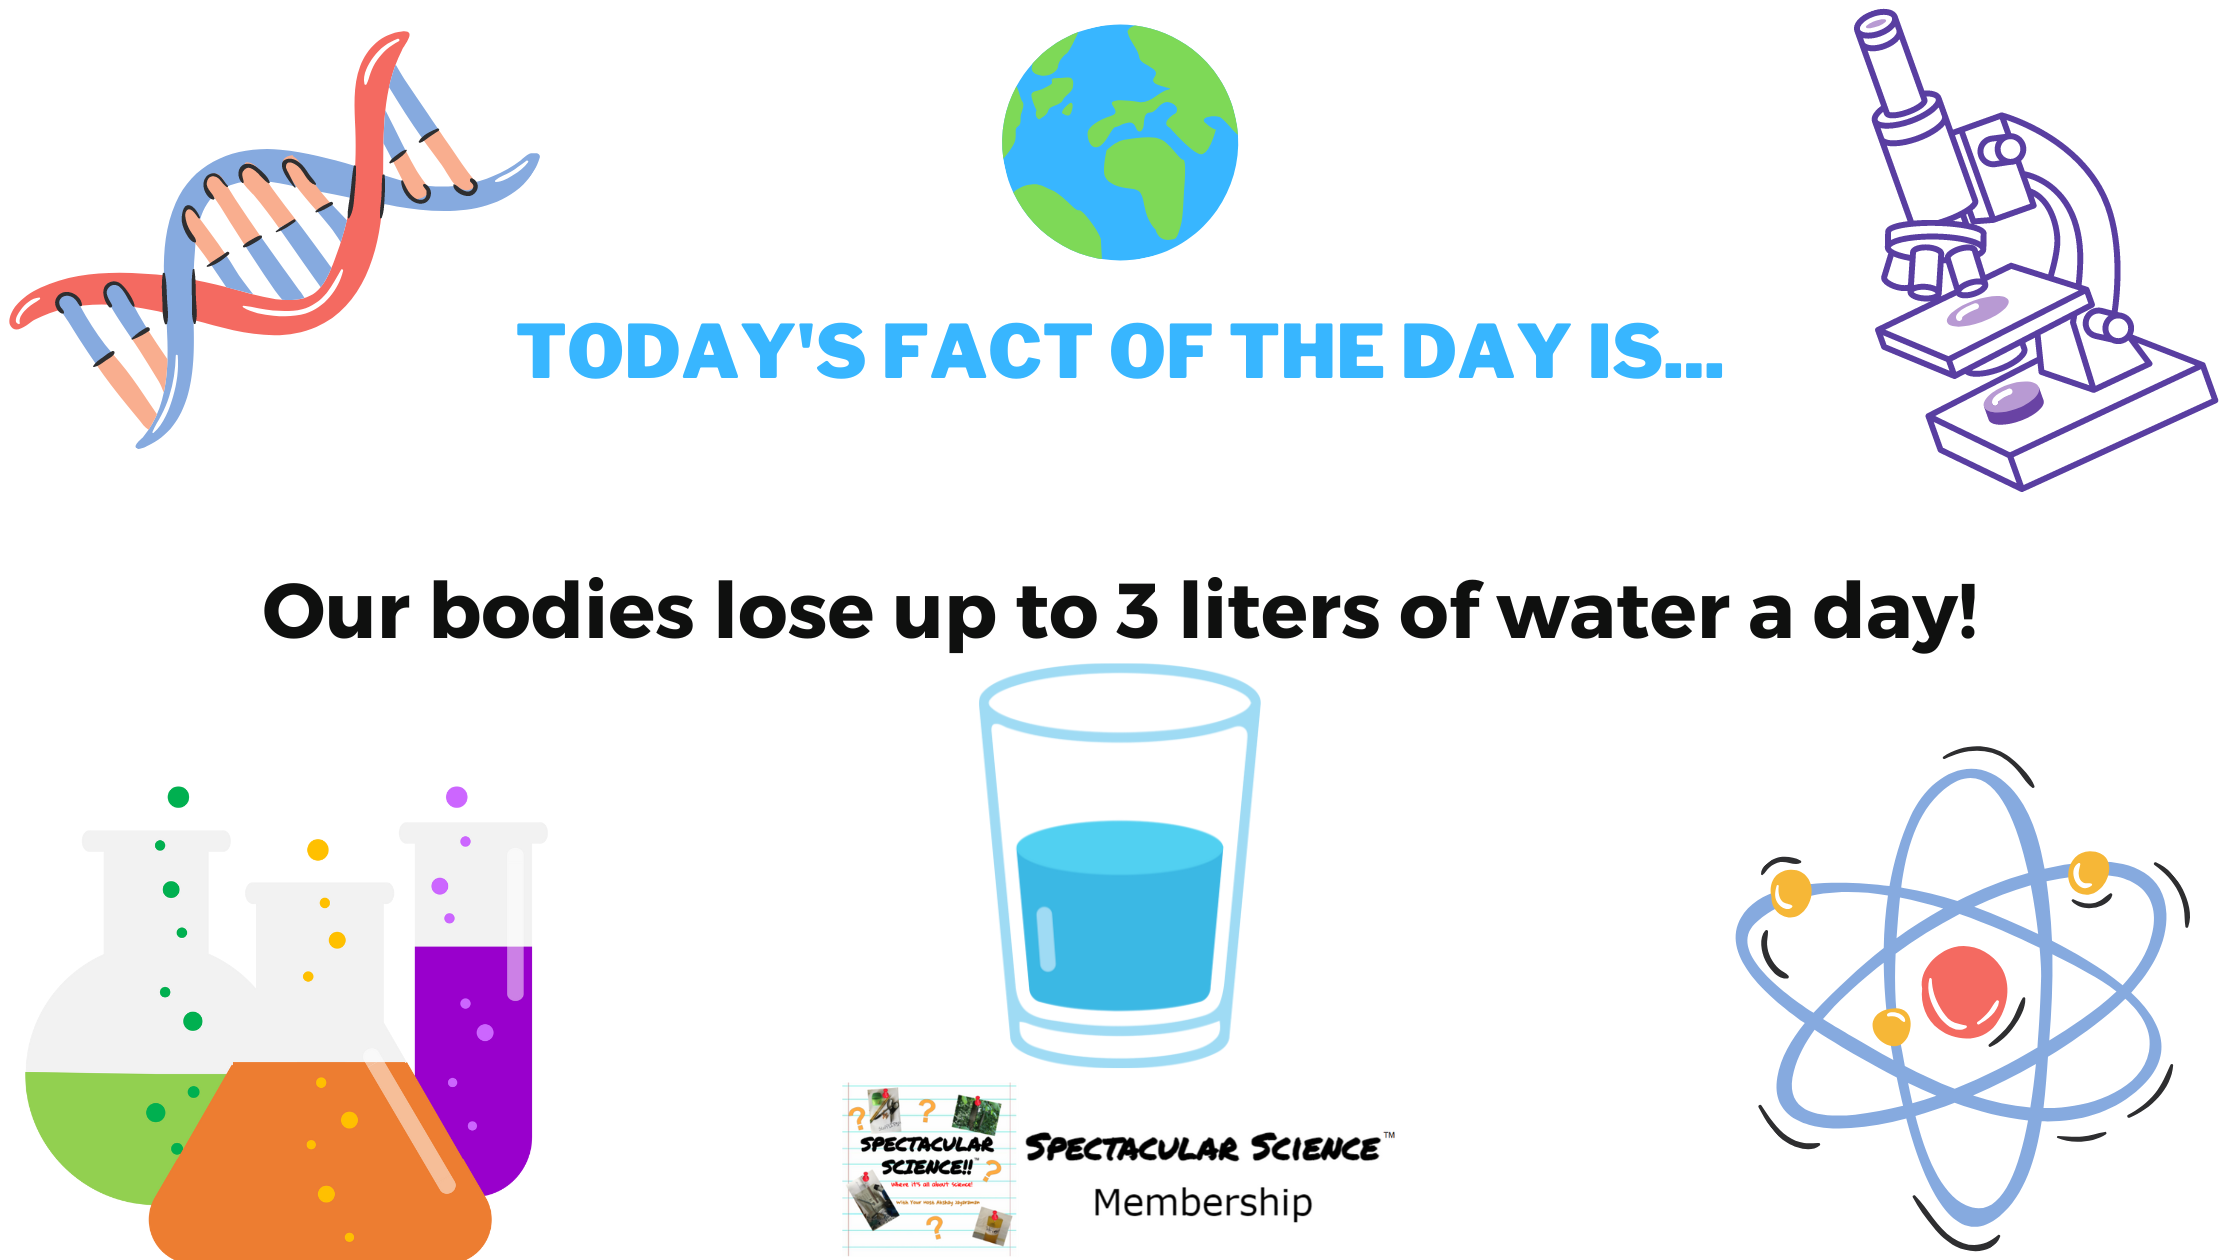 Fact of the Day Image September 16th